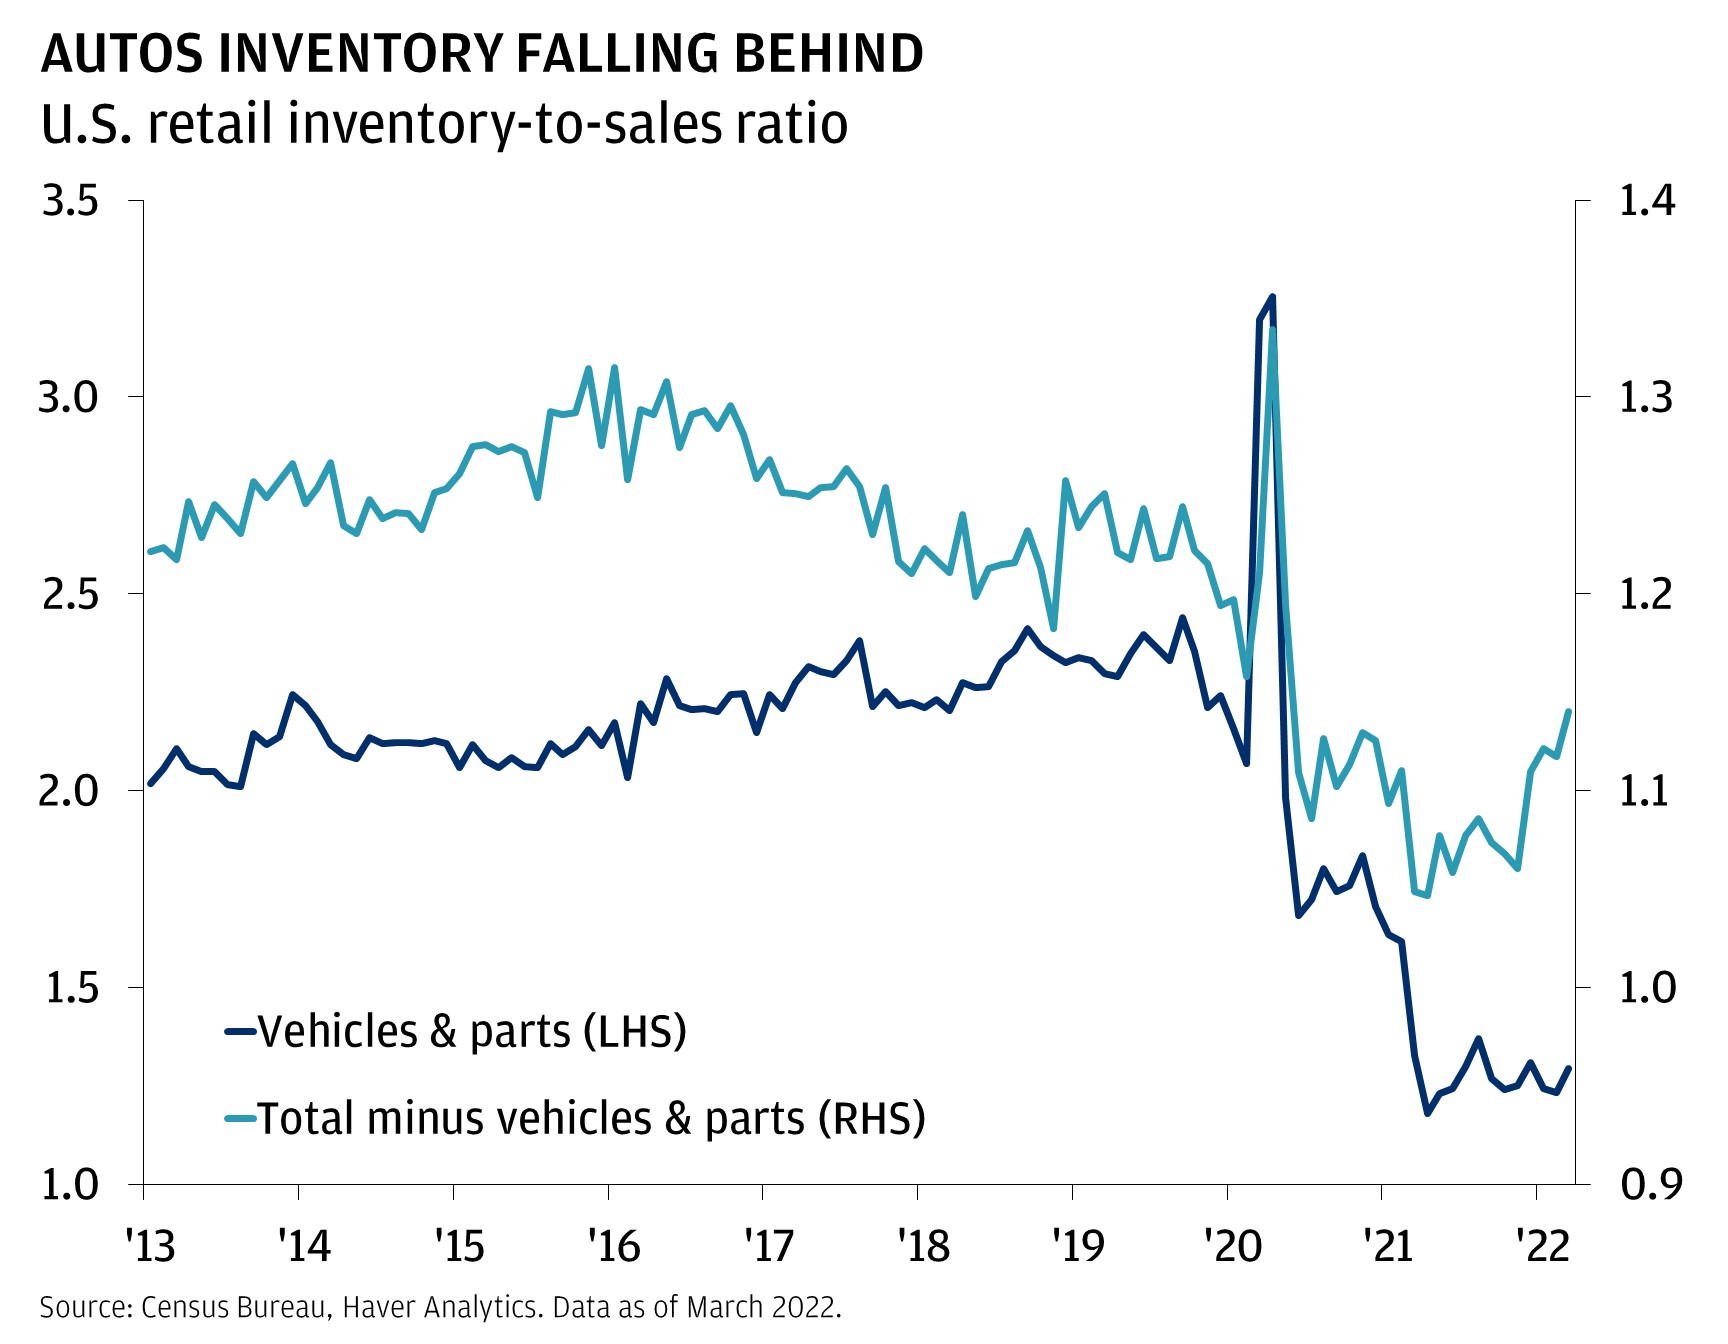 This chart shows retail inventory to sales ratio for vehicles & parts and total minus vehicles & parts, from January 2013 to March 2022.